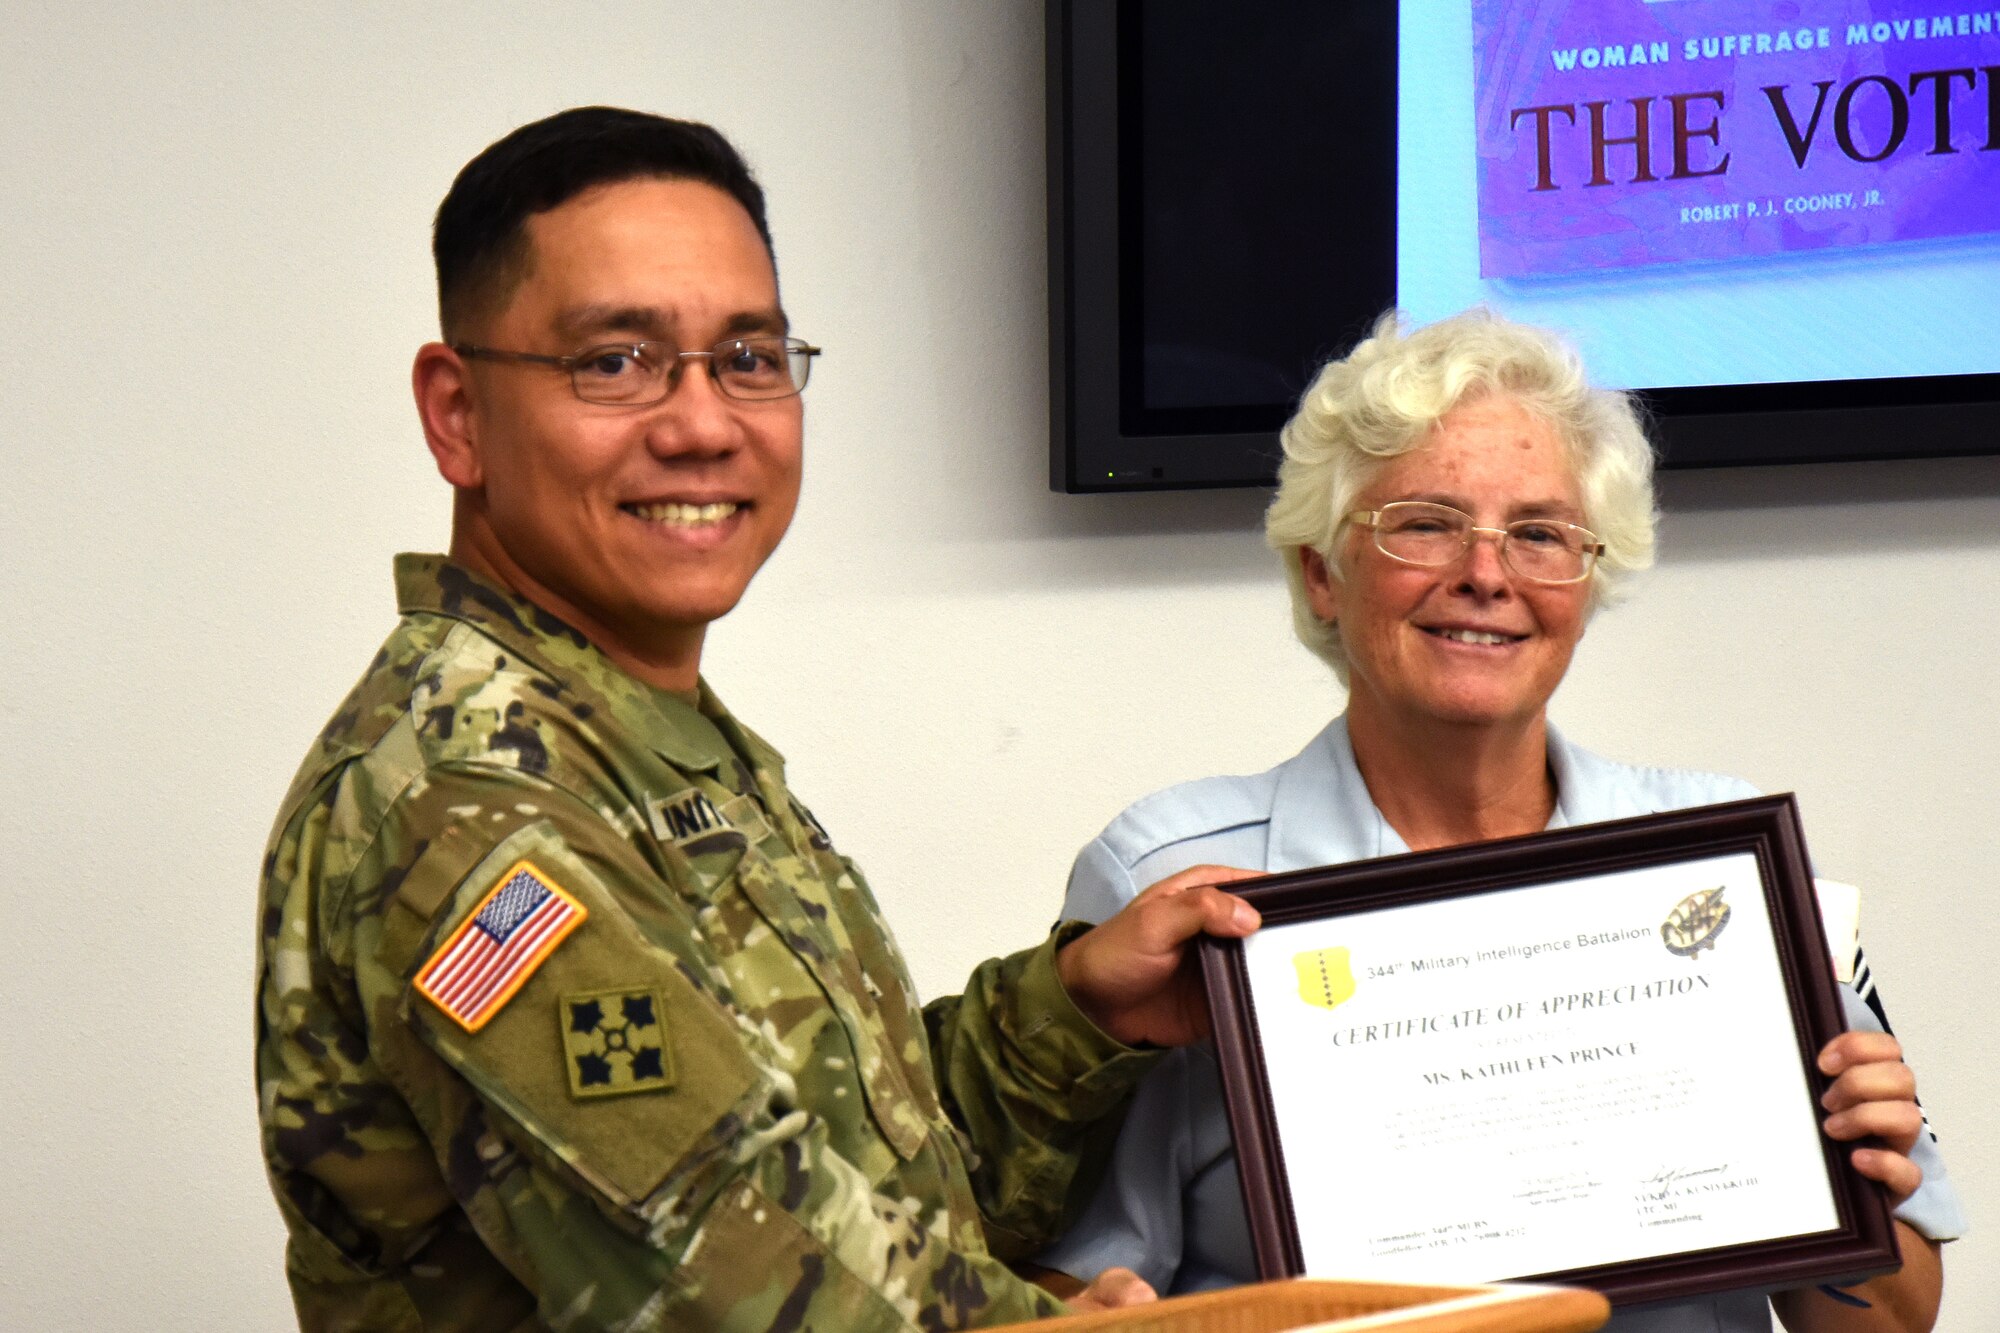 U.S. Army Lt. Col. Yukio Kuniyuki, 344th Military Intelligence Battalion commander, presents retired Chief Master Sgt. Kathleen Prince with a certificate of appreciation for speaking during the Women’s Equality Day event at Taylor Chapel on Goodfellow Air Force Base, Texas, Aug. 24, 2018. The 344th MI BN hosted the event in honor of Women’s Equality Day held annually to celebrate the signing of the Nineteenth Amendment allowing American women the right to vote. (U.S. Air Force photo by Airman 1st Class Seraiah Hines/Released)